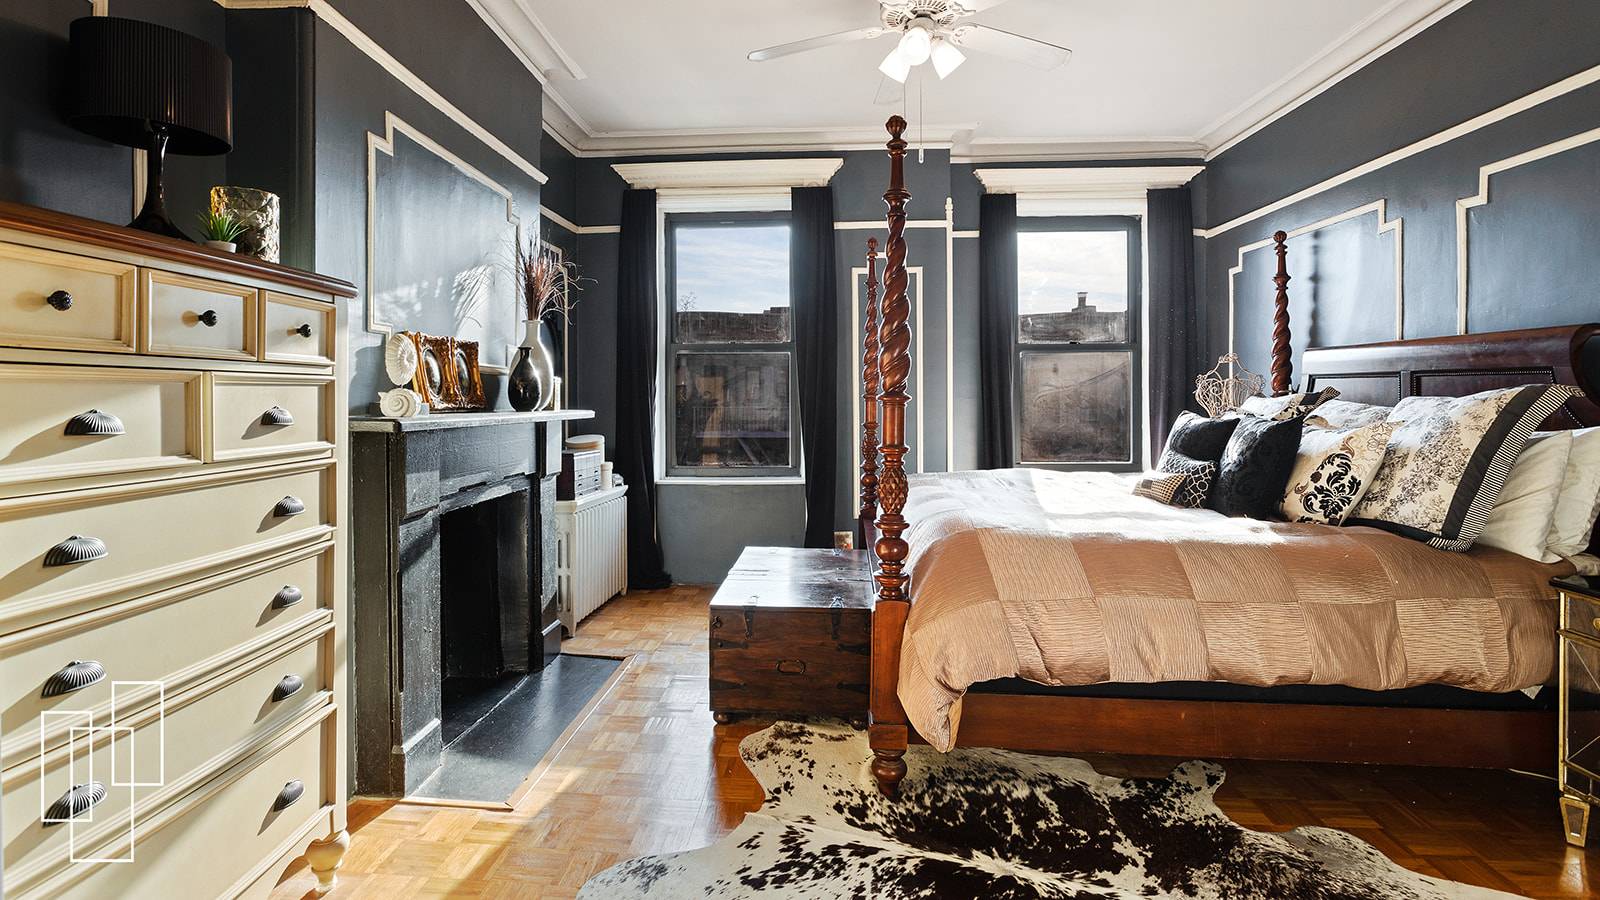 This lovely home offers a touch of old Brooklyn with modern appeal in an ideal center Slope location, with nearly 1, 000 square feet of top floor light, air, and ...